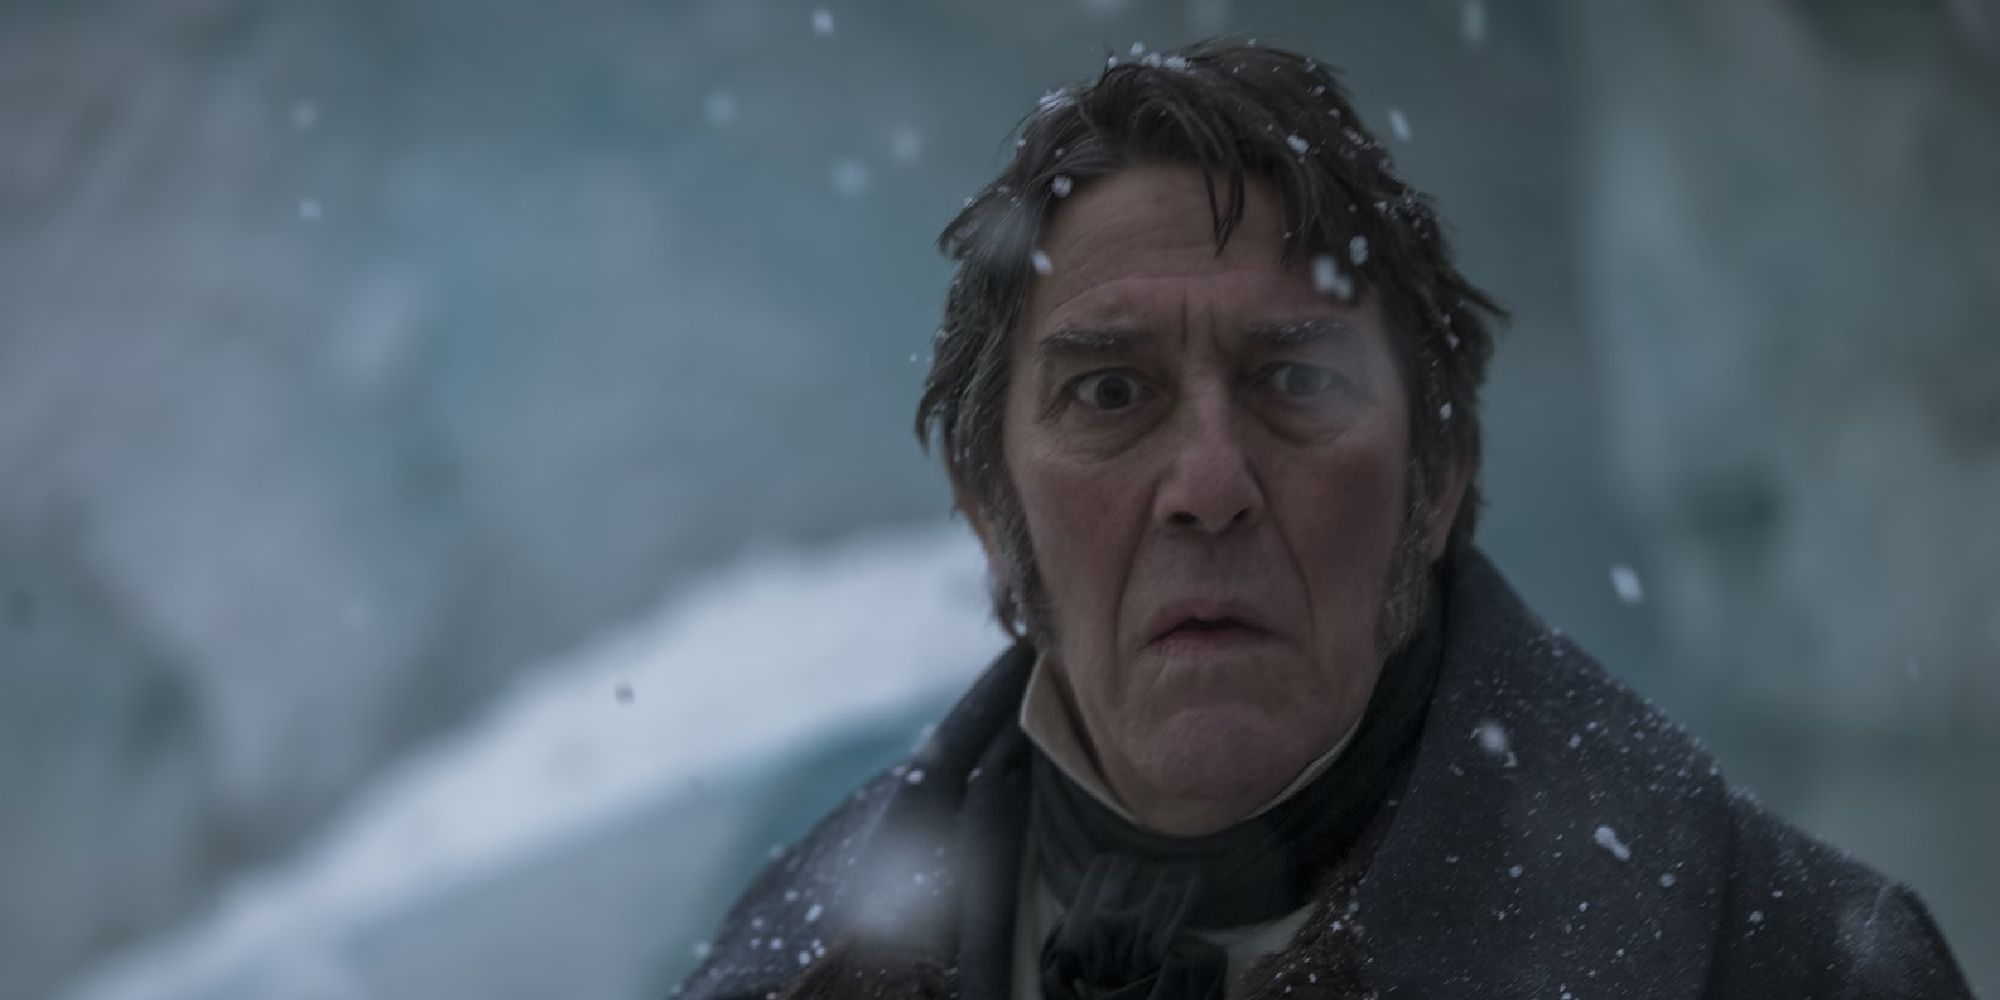 Ciarán Hinds with a worried expression in The Terror